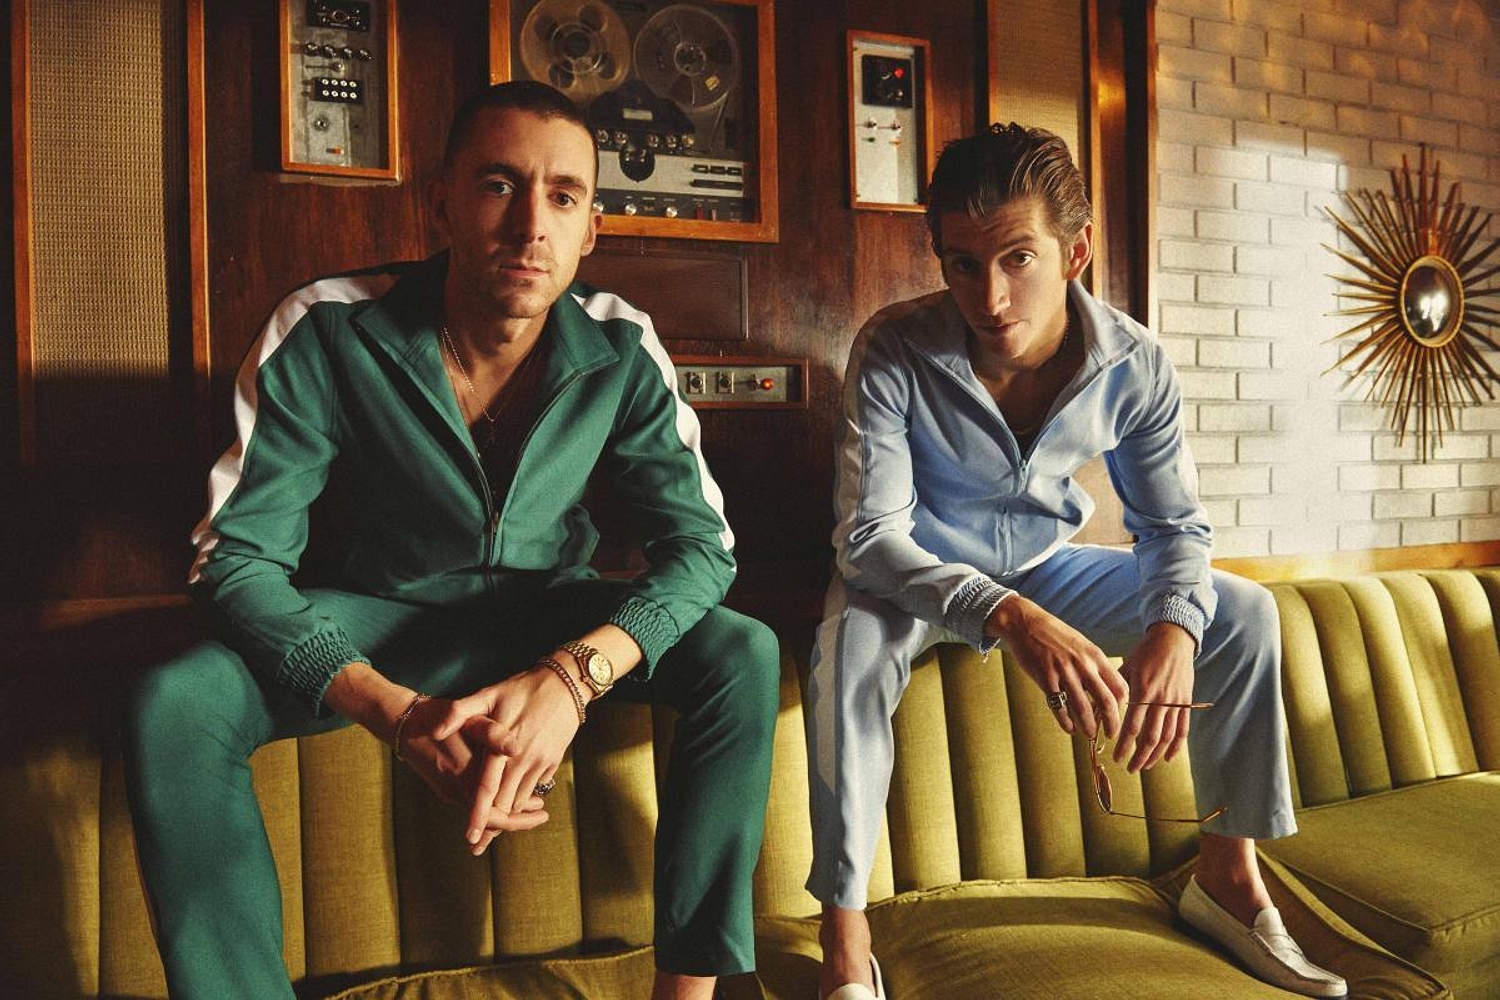 The Last Shadow Puppets might release “trilogy” of albums